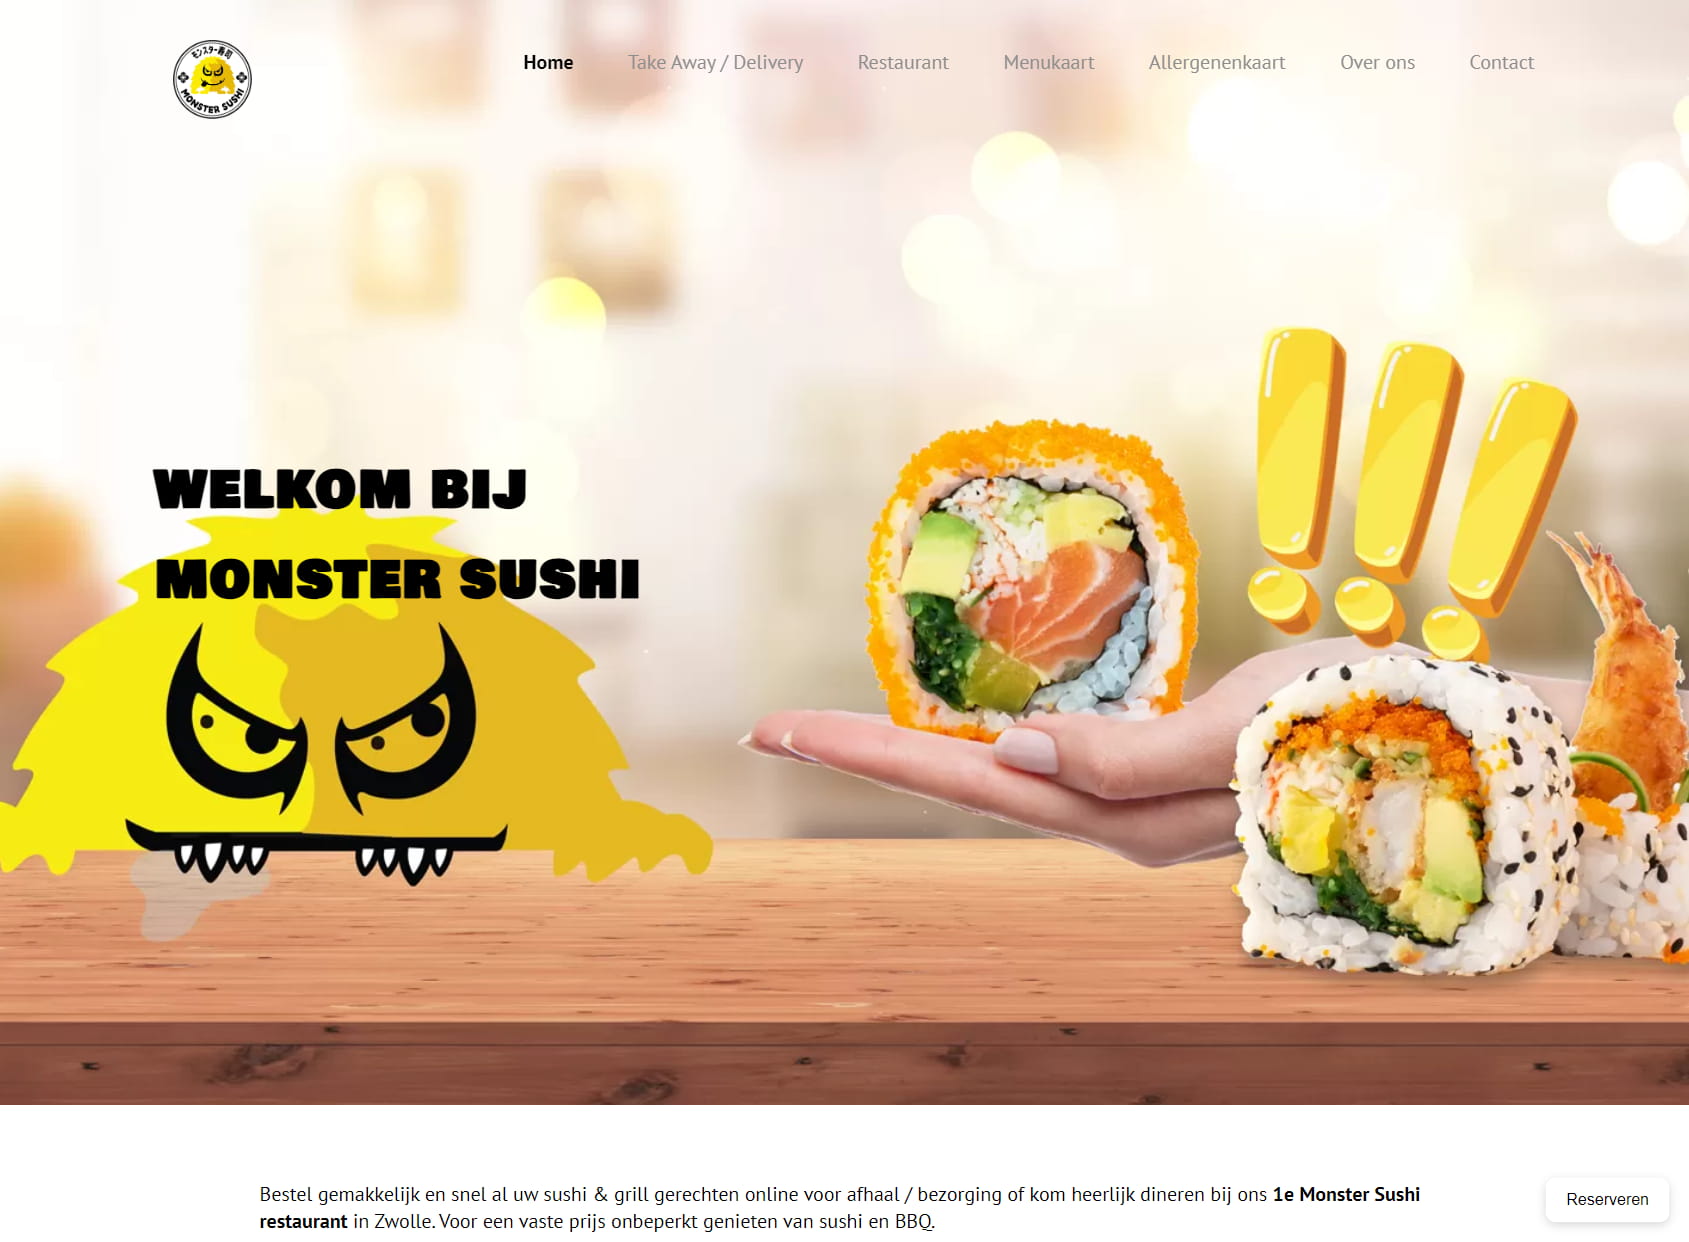 MONSTER SUSHI ZWOLLE